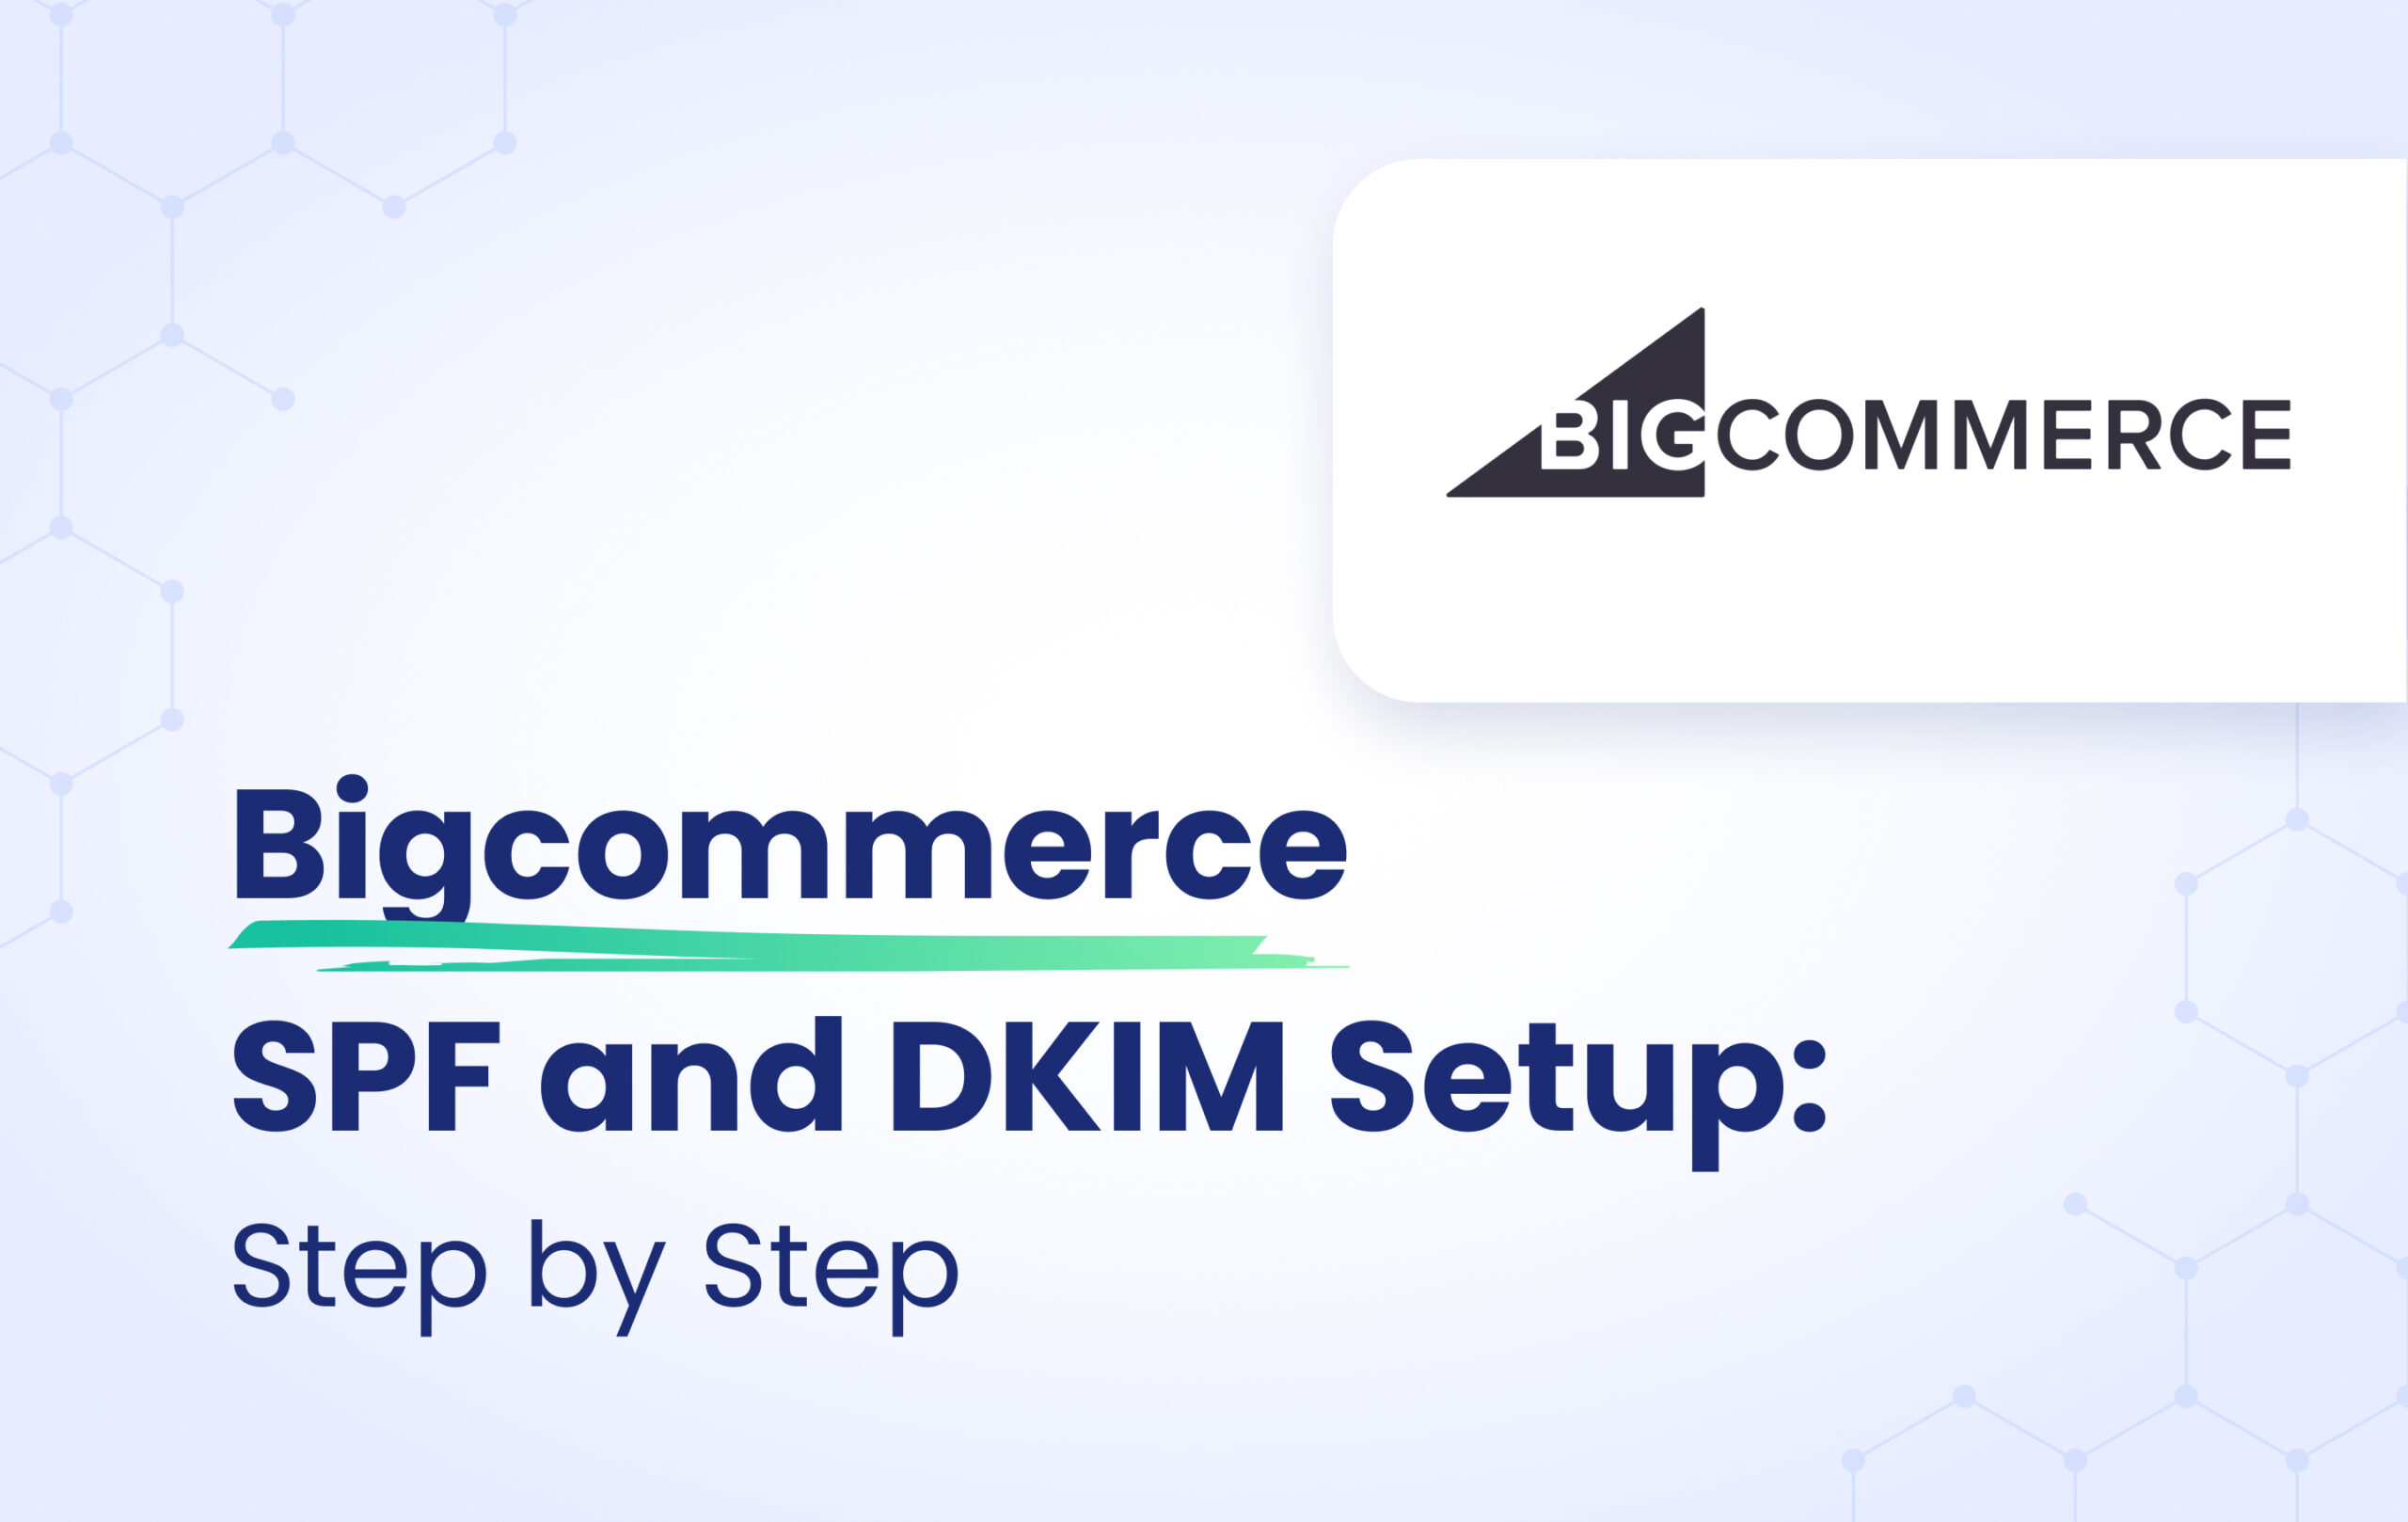 Makeswift is joining BigCommerce!